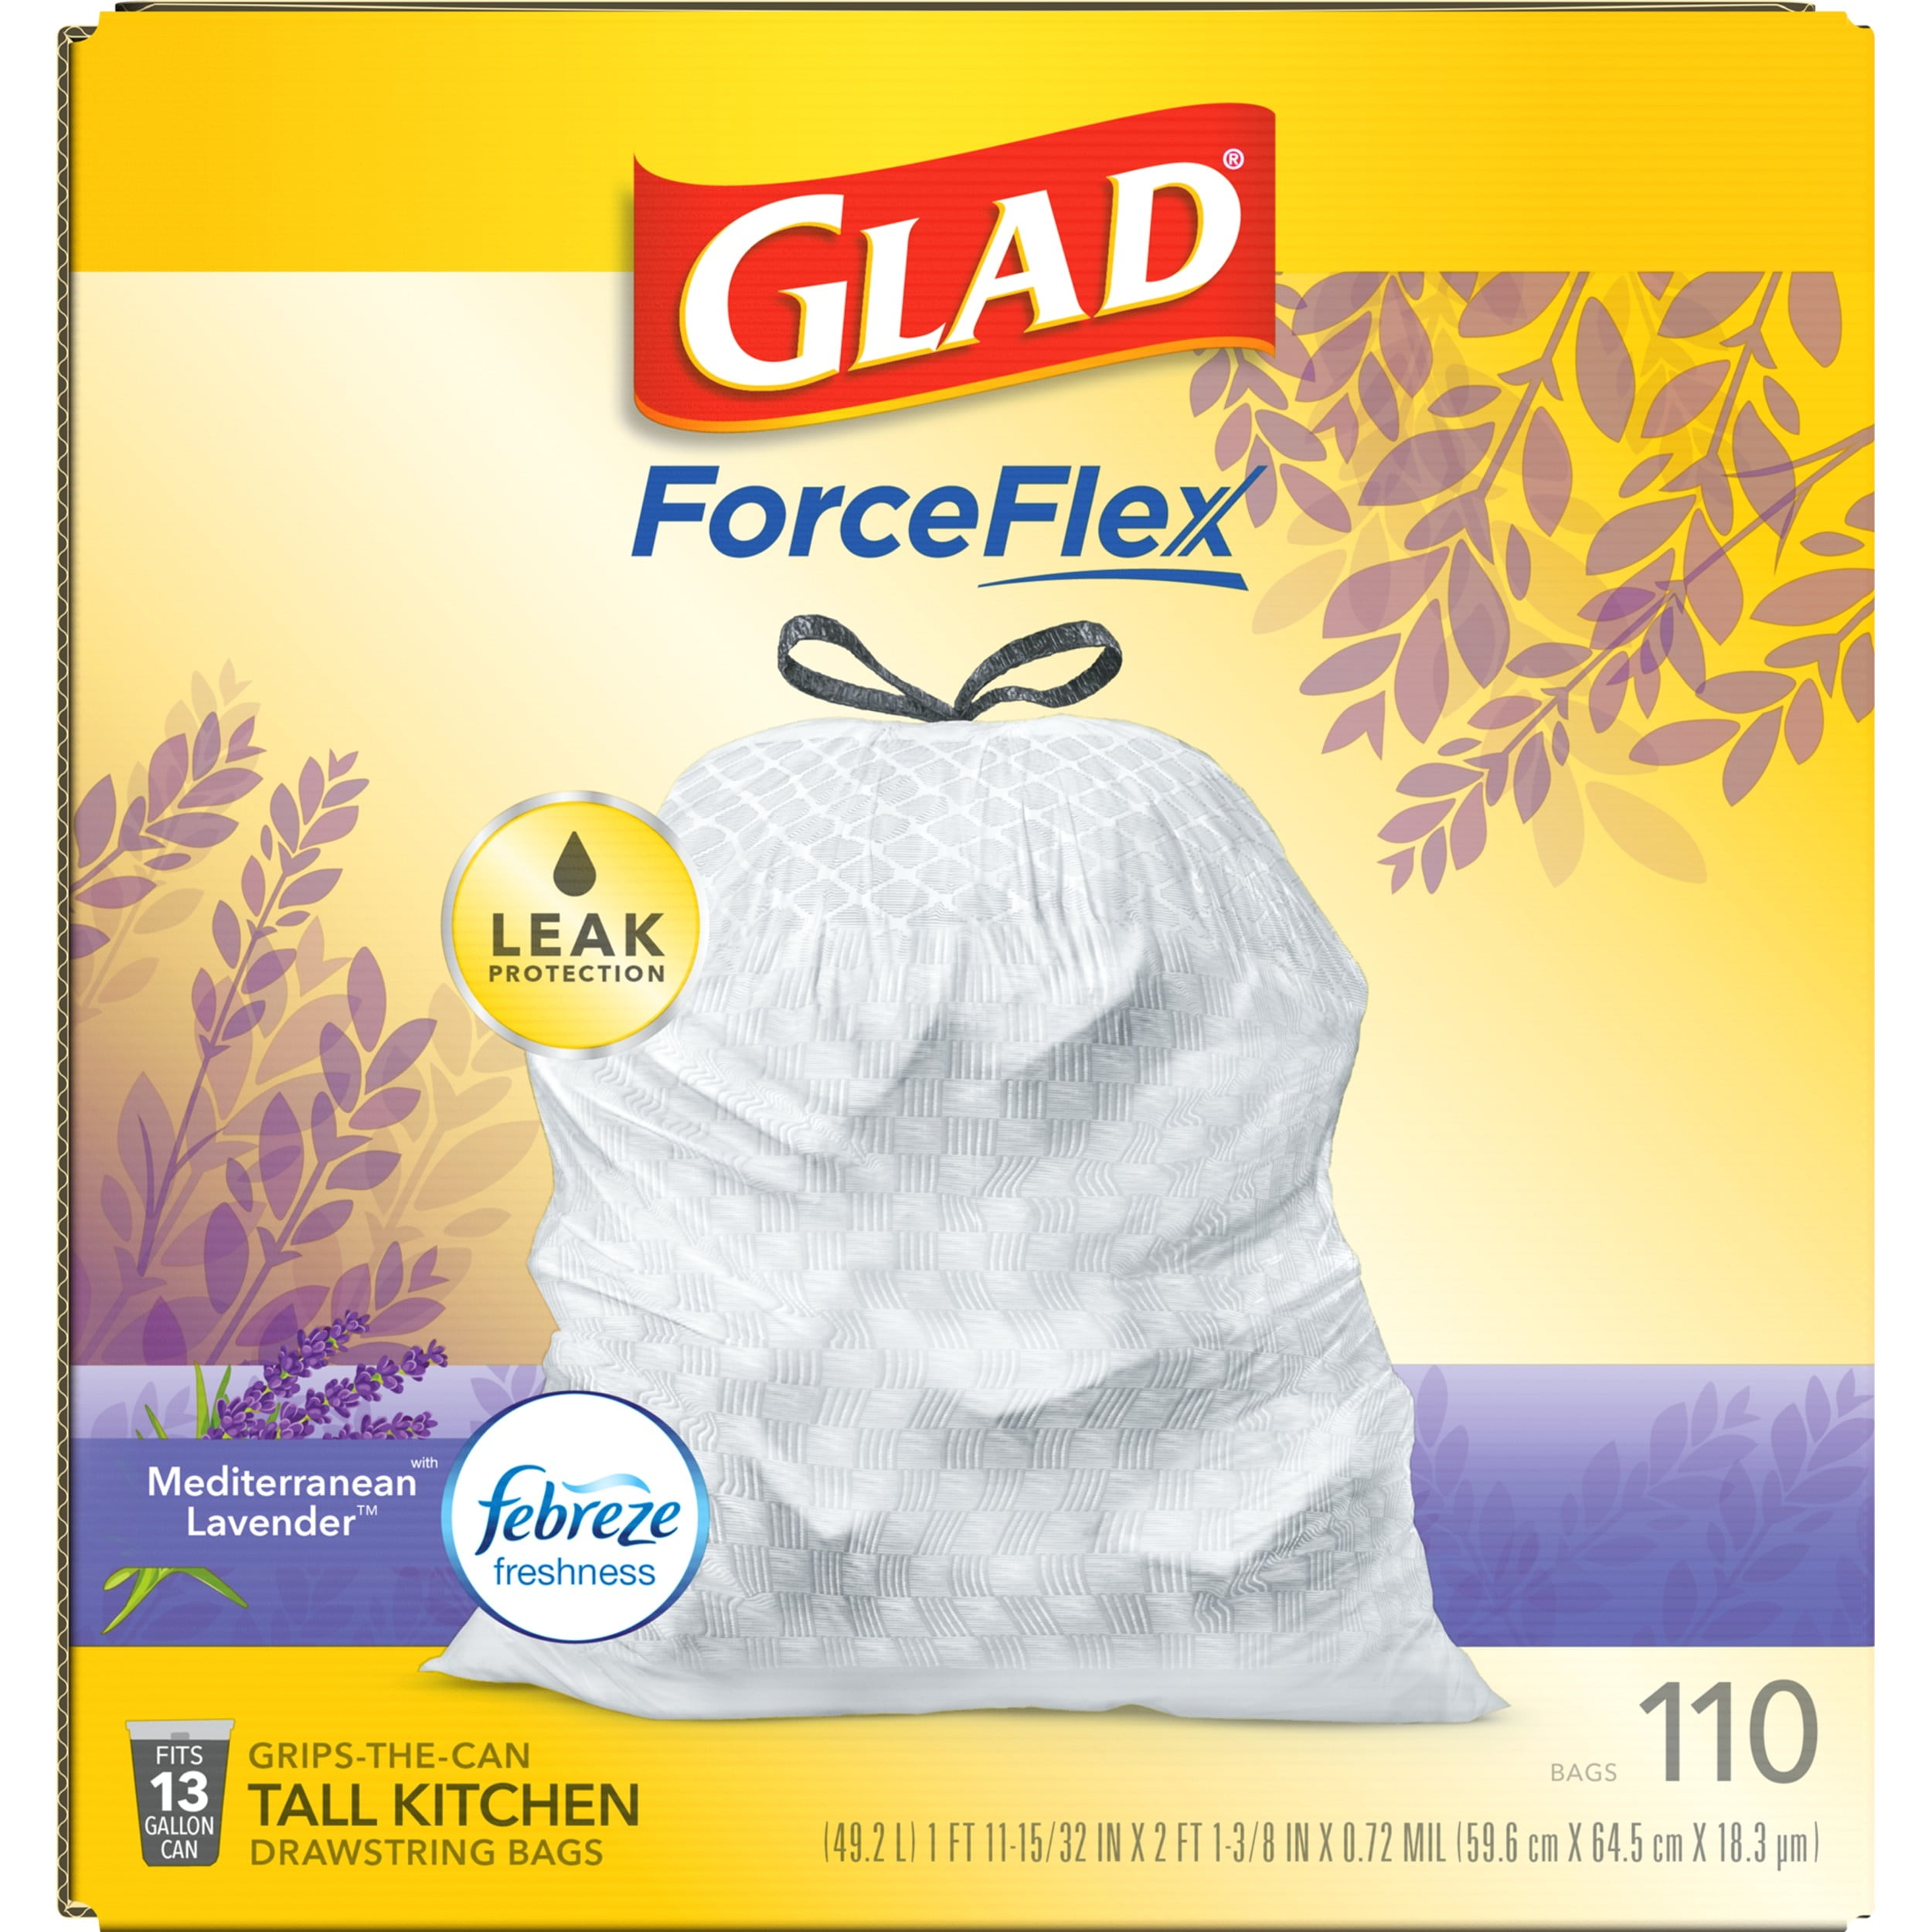 Glad ForceFlexPlus Tall Kitchen Drawstring Lavender with Febreze Trash Bags,  34 ct - King Soopers